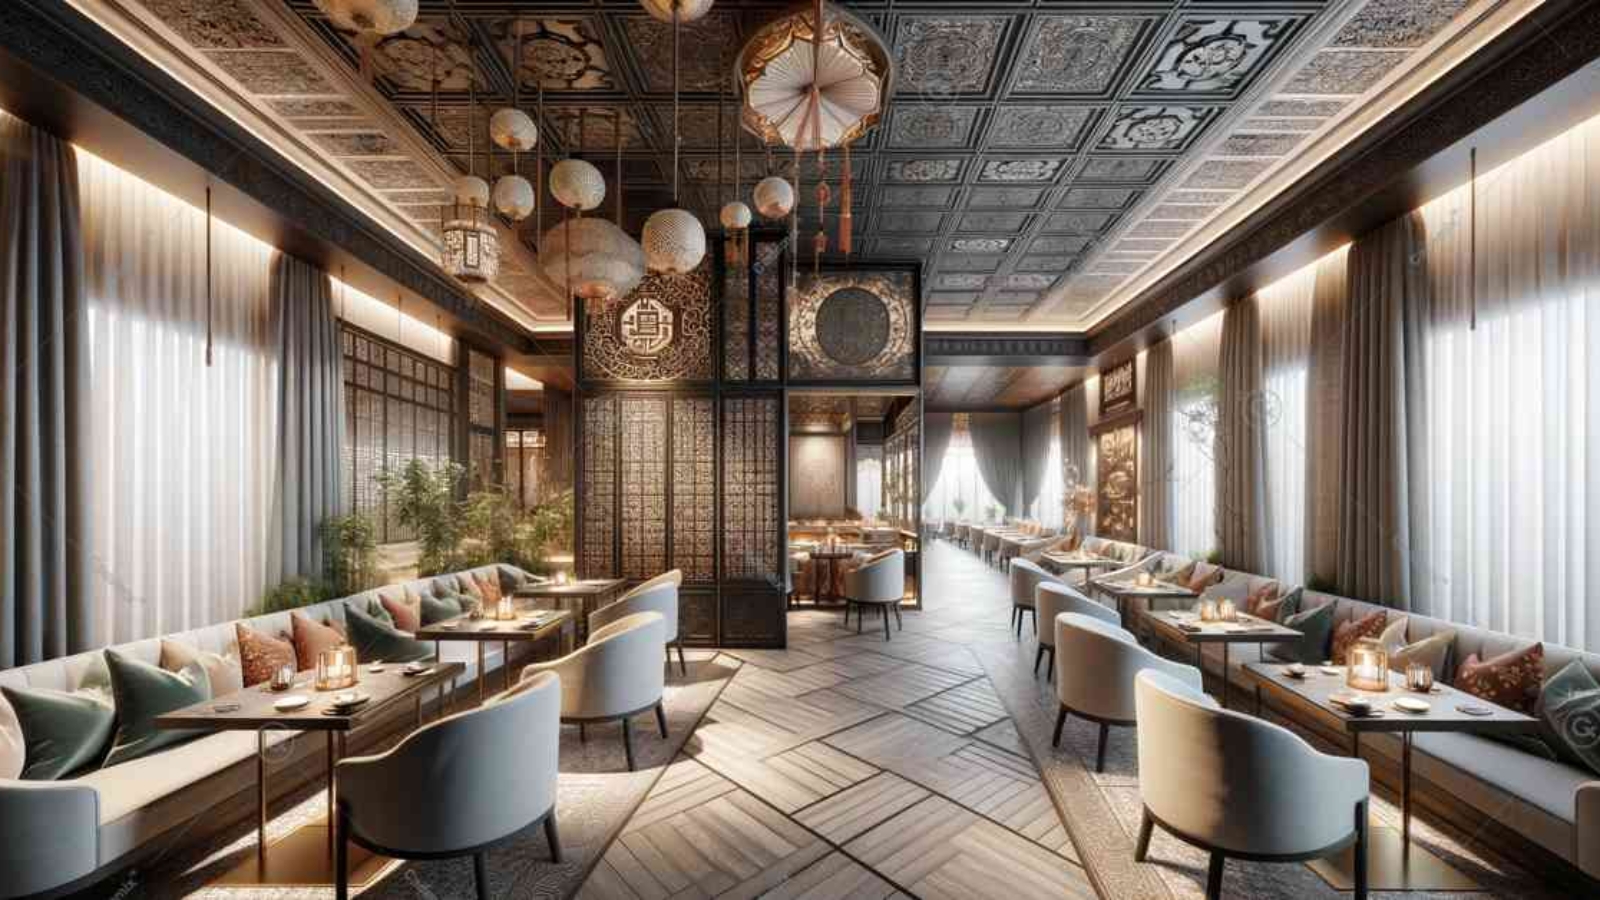 This is a luxurious restaurant interior adorned with traditional oriental symbols, blending minimalist and human-centered design elements. This image features intricate details such as lattice work, ornate carvings, and silk tapestries set against a modern layout.